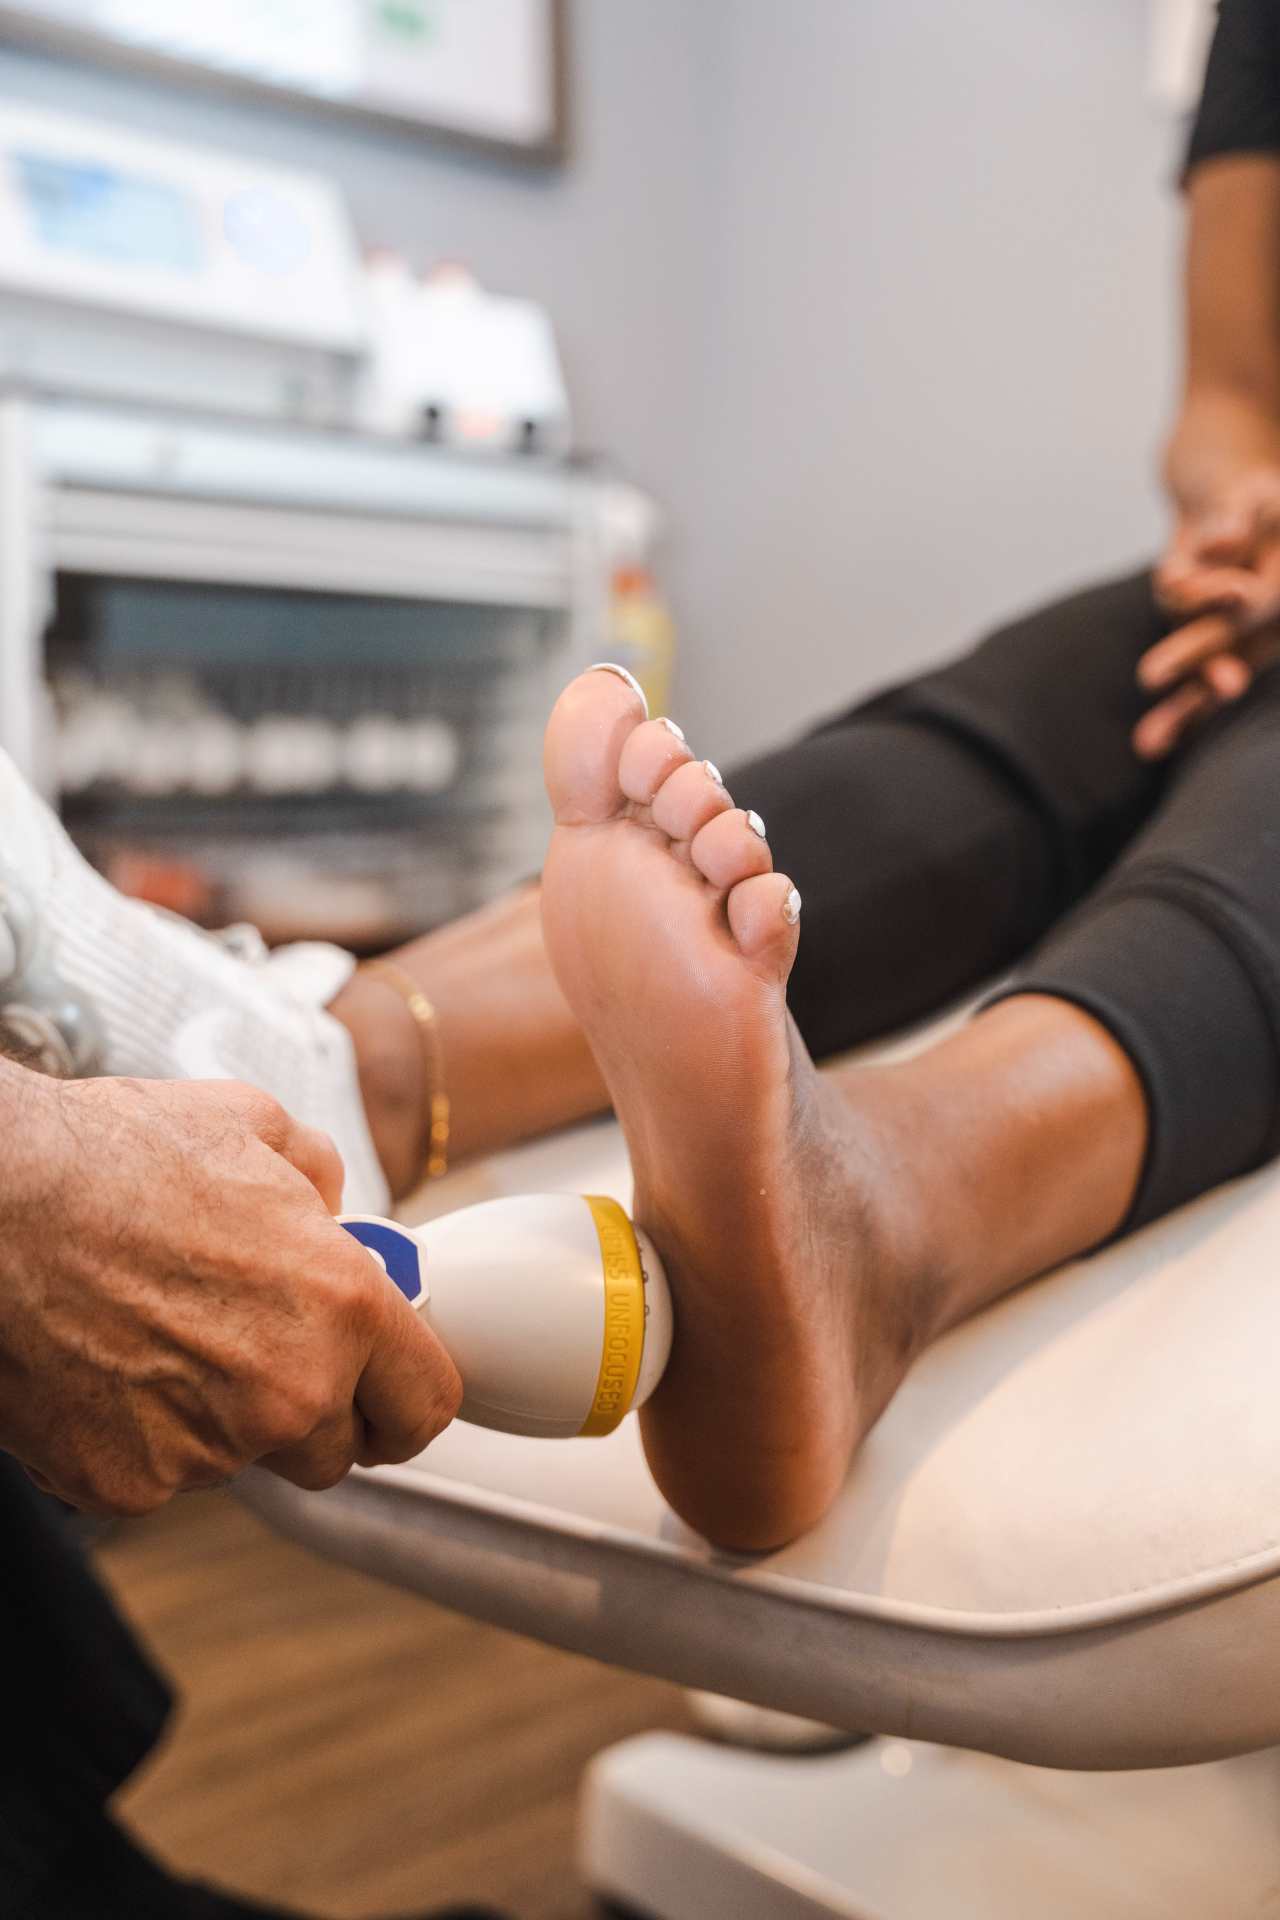 SoftWave Therapy as a Treatment Option for Plantar Fasciitis